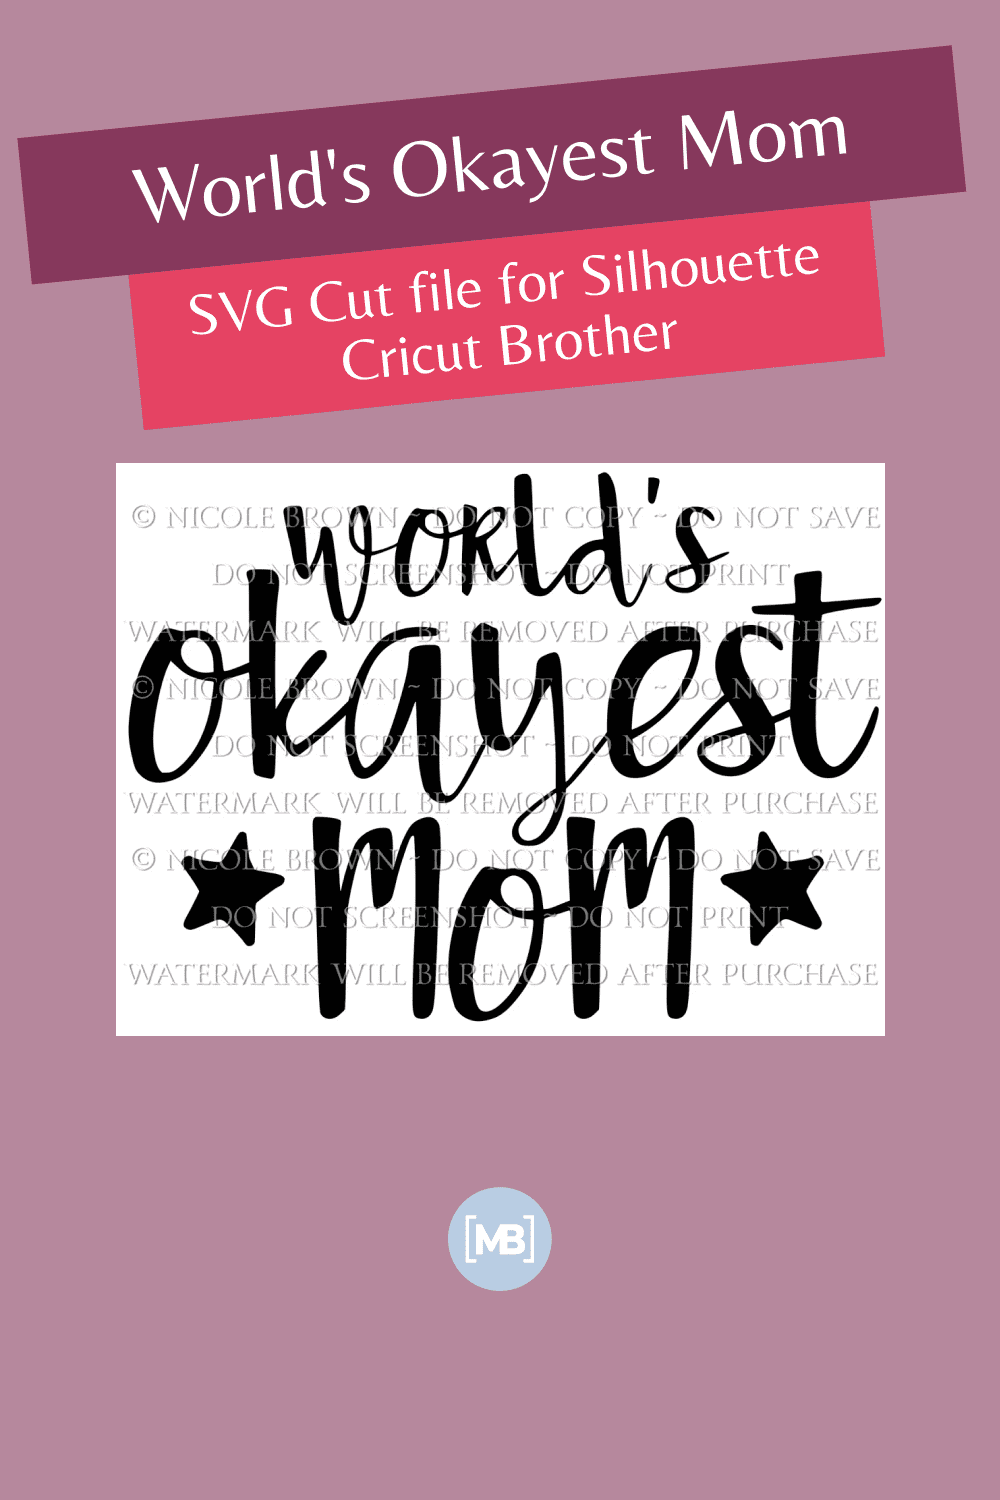 World's Okayest Mom SVG Cut file for Silhouette Cricut Brother.